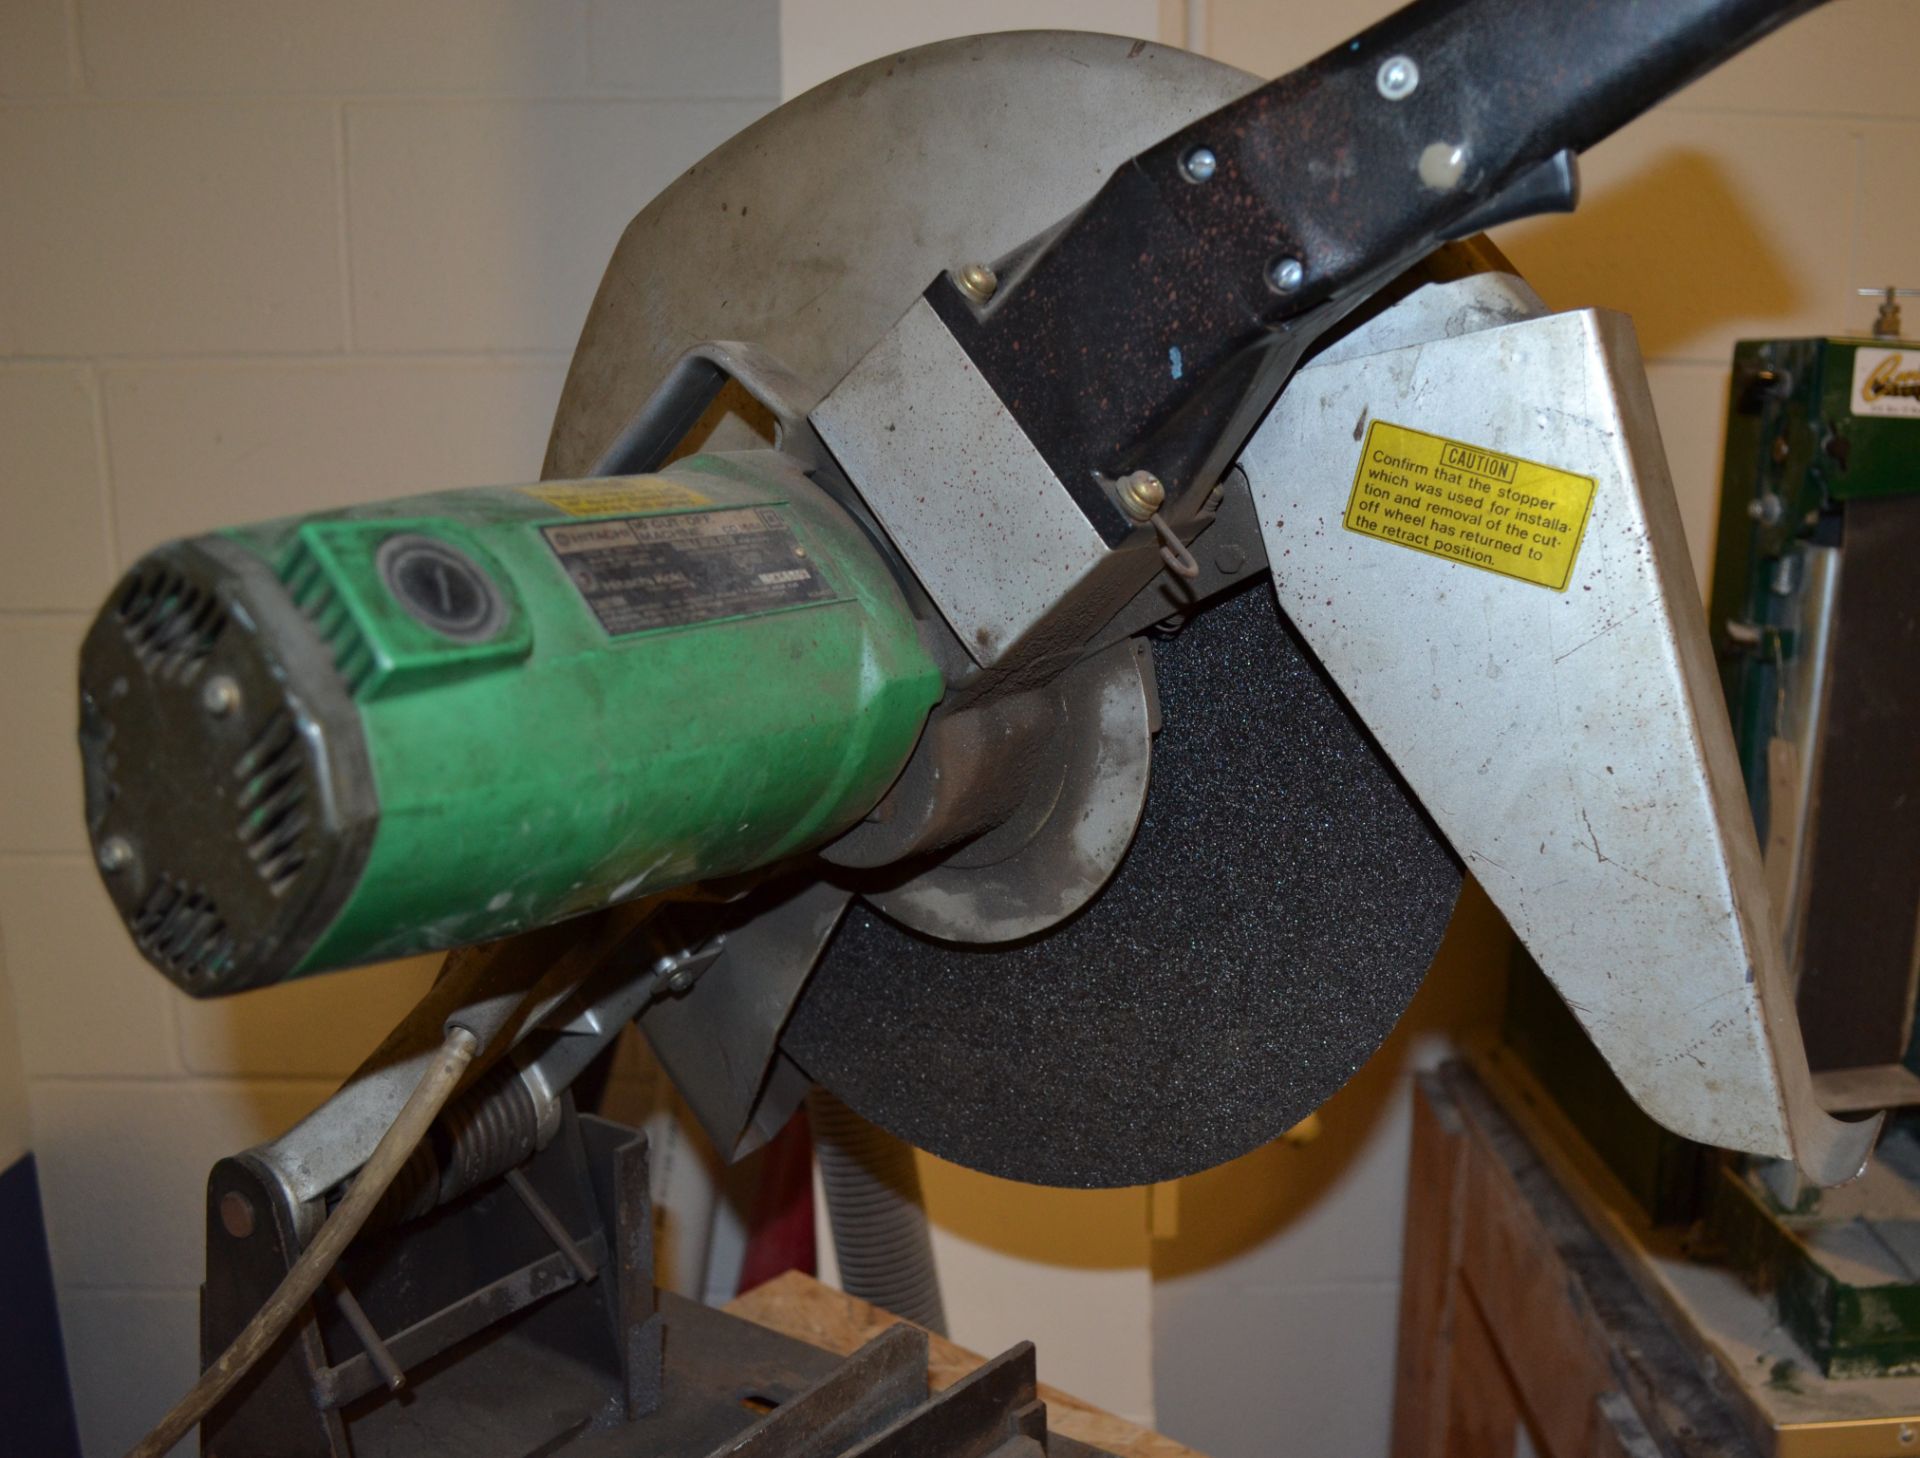 Hitchi Model CC16SA 16" Cut-Off Saw With Extra Blades - Image 4 of 6